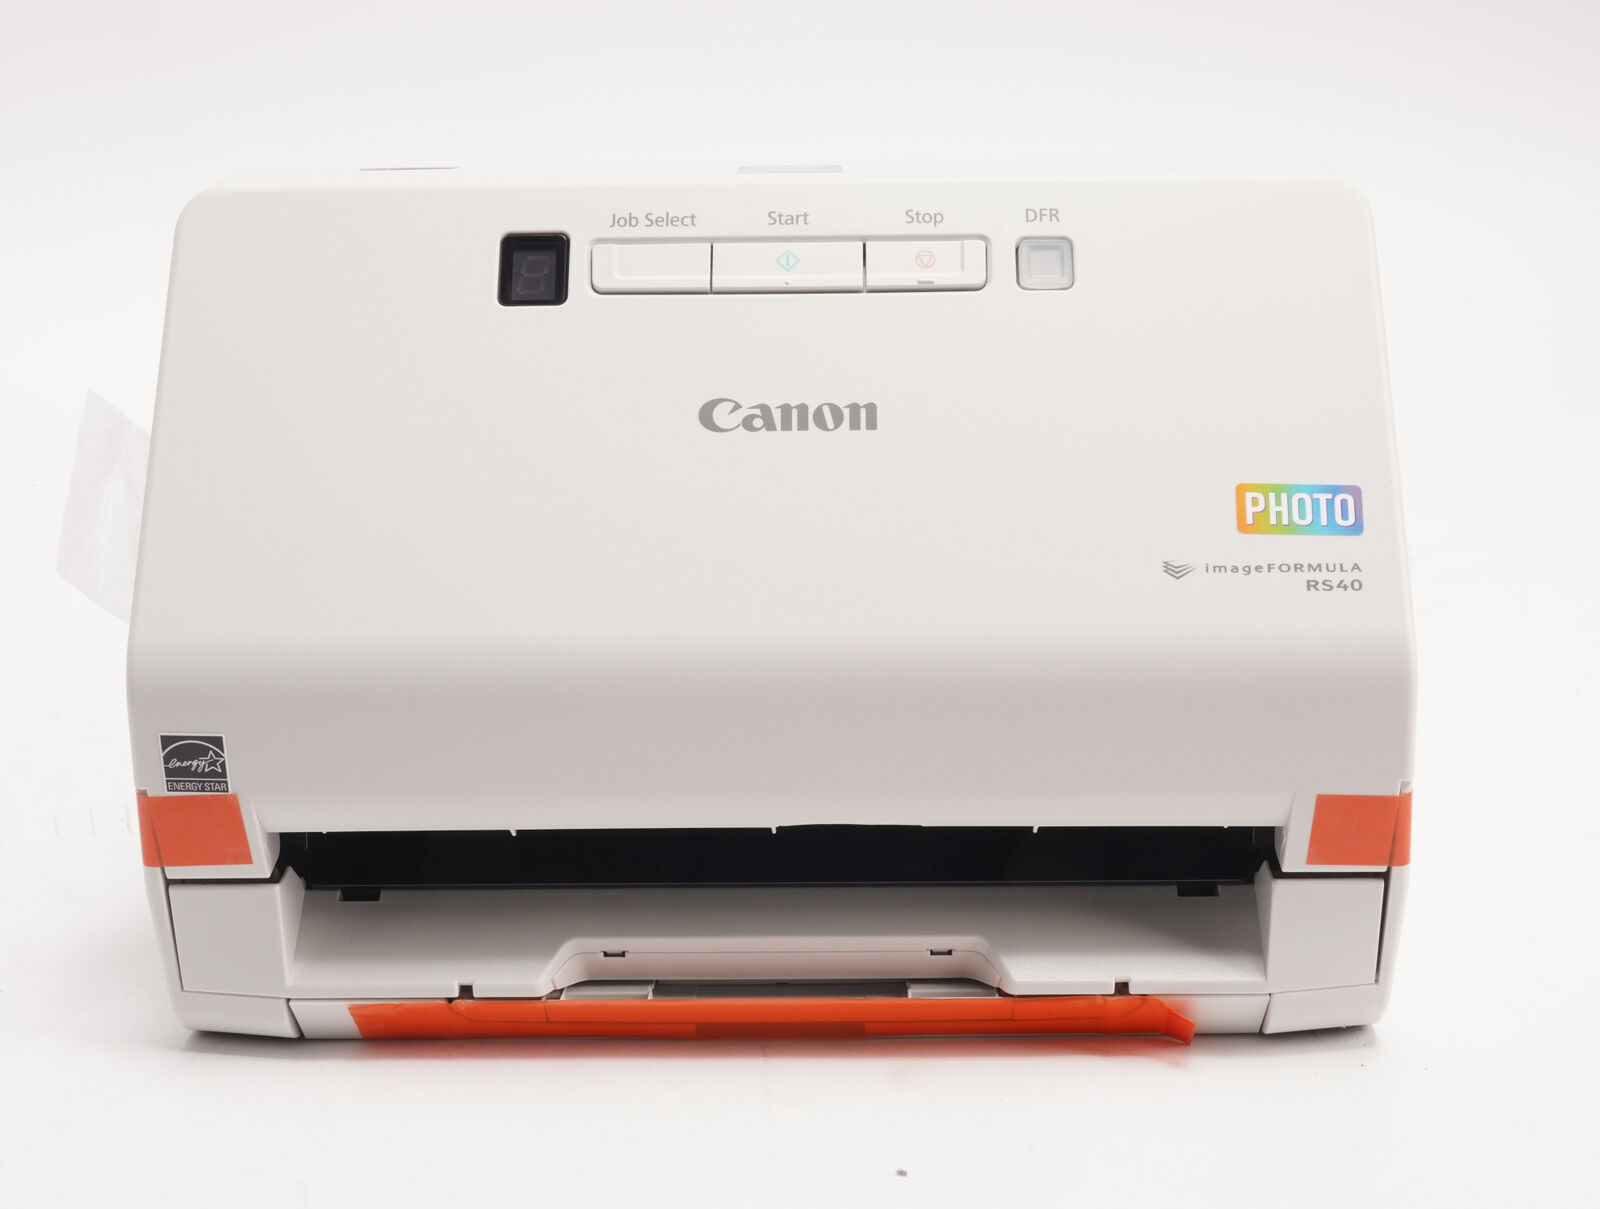 Canon image FORMULA RS40 Photo and Document Scanner